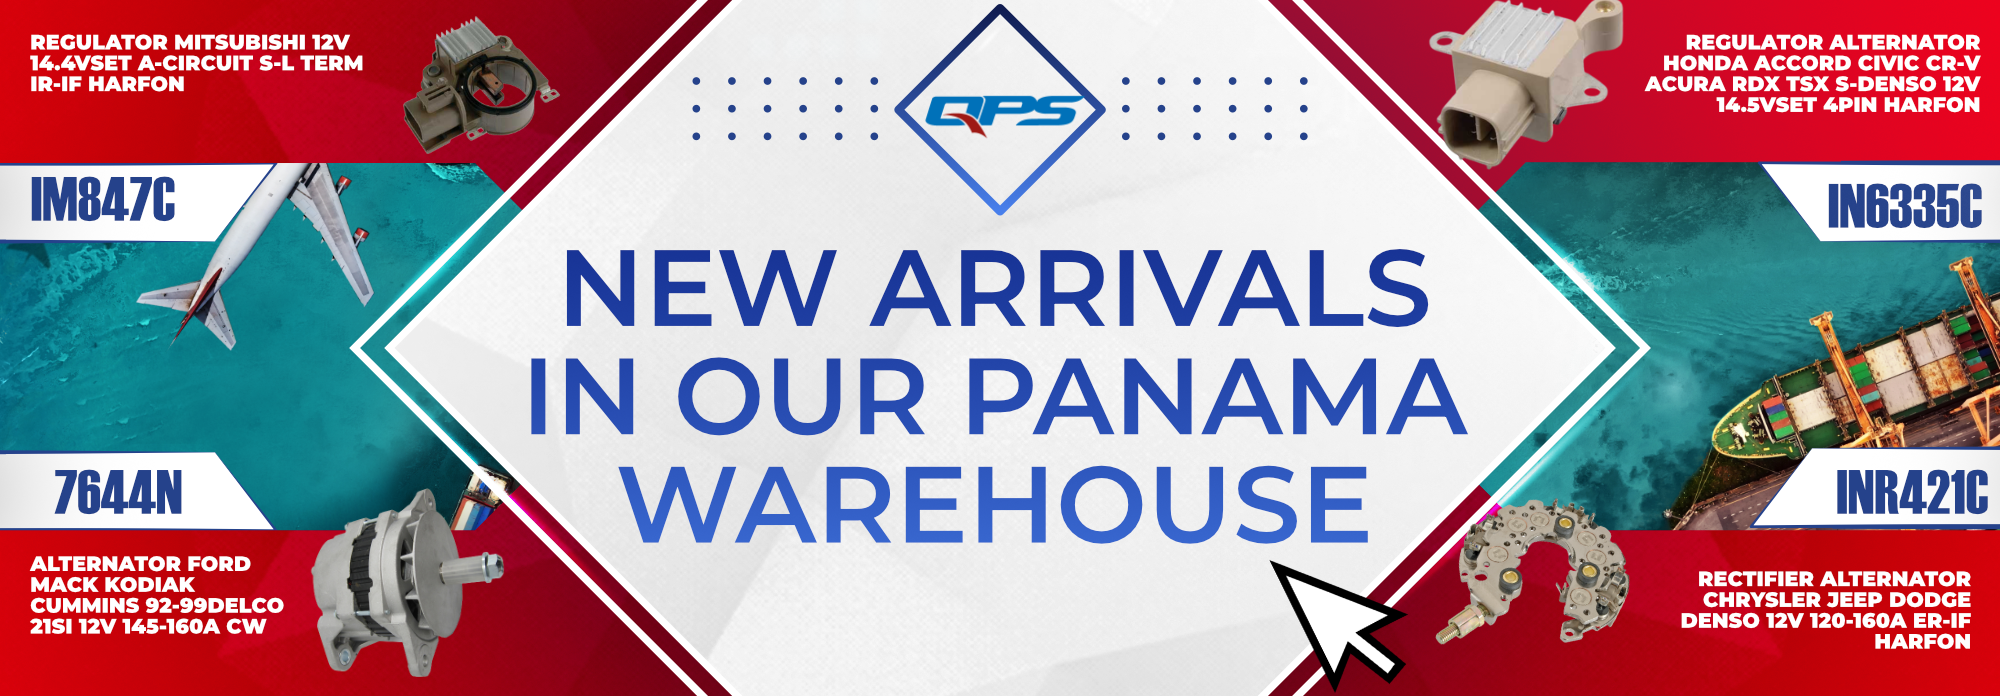 New Arrivals in our Panamá Warehouse